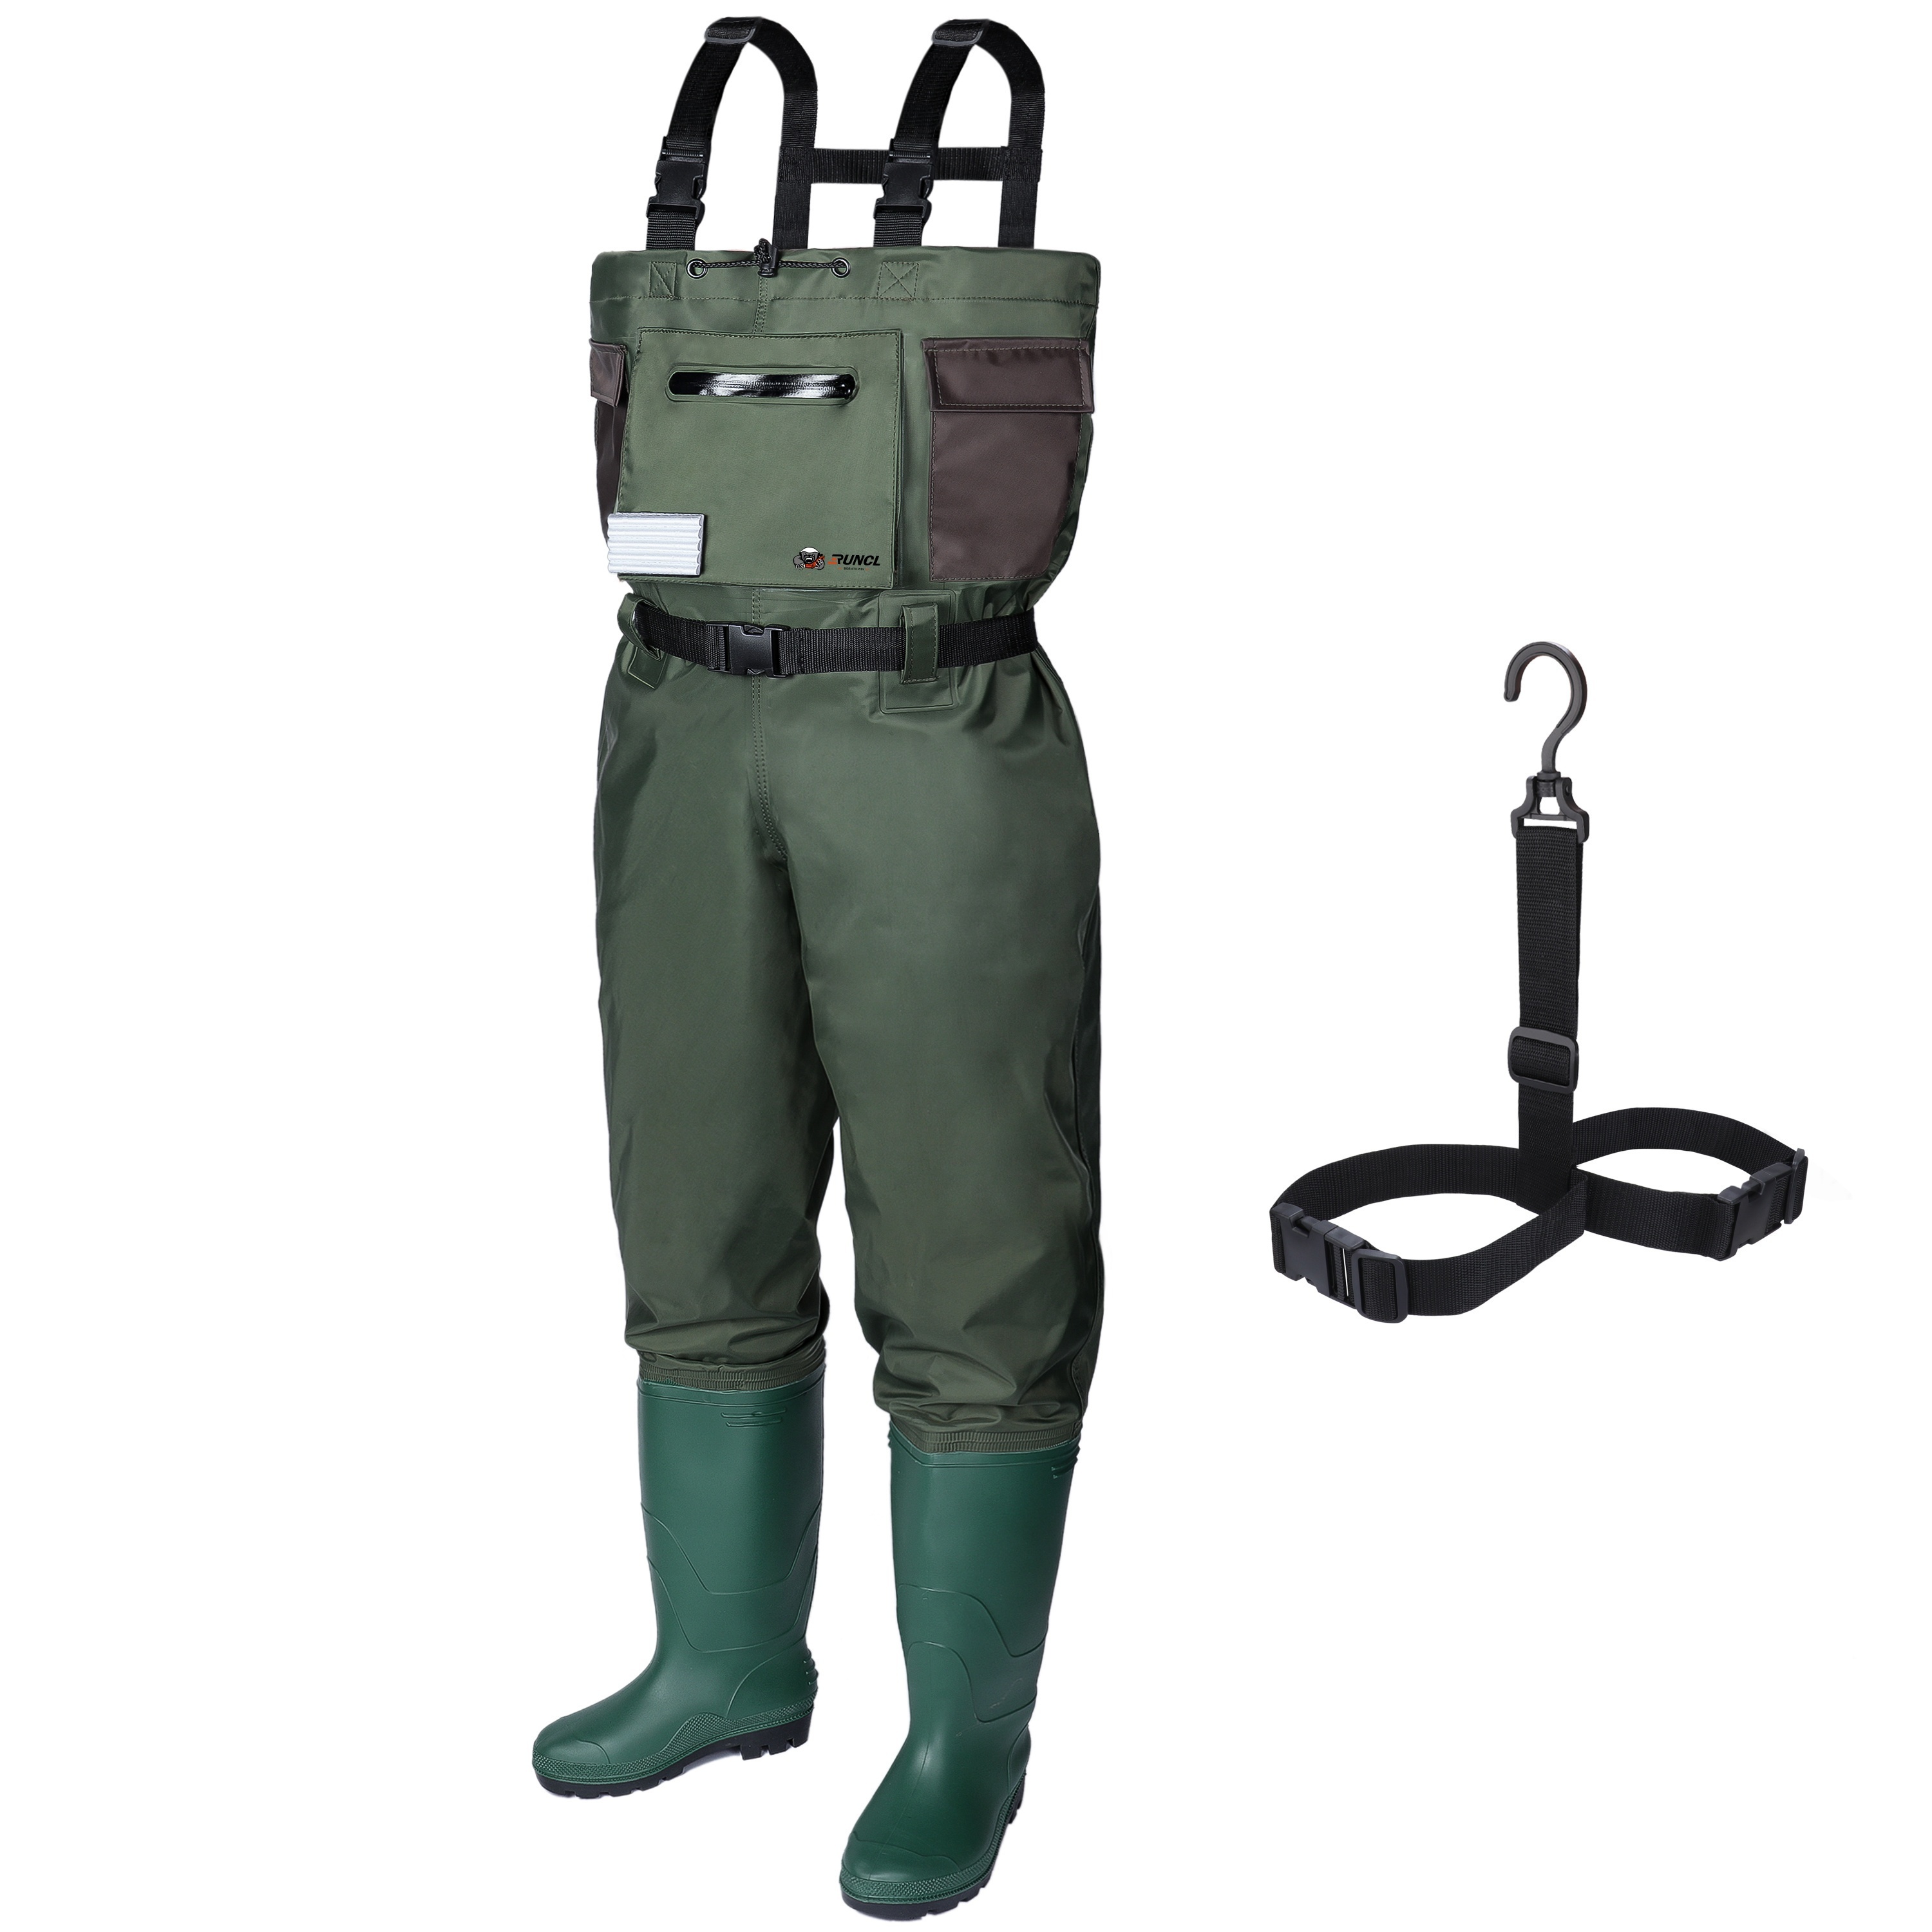 FortMen Men's Fishing Trousers with Boots Waterproof Chest Waders